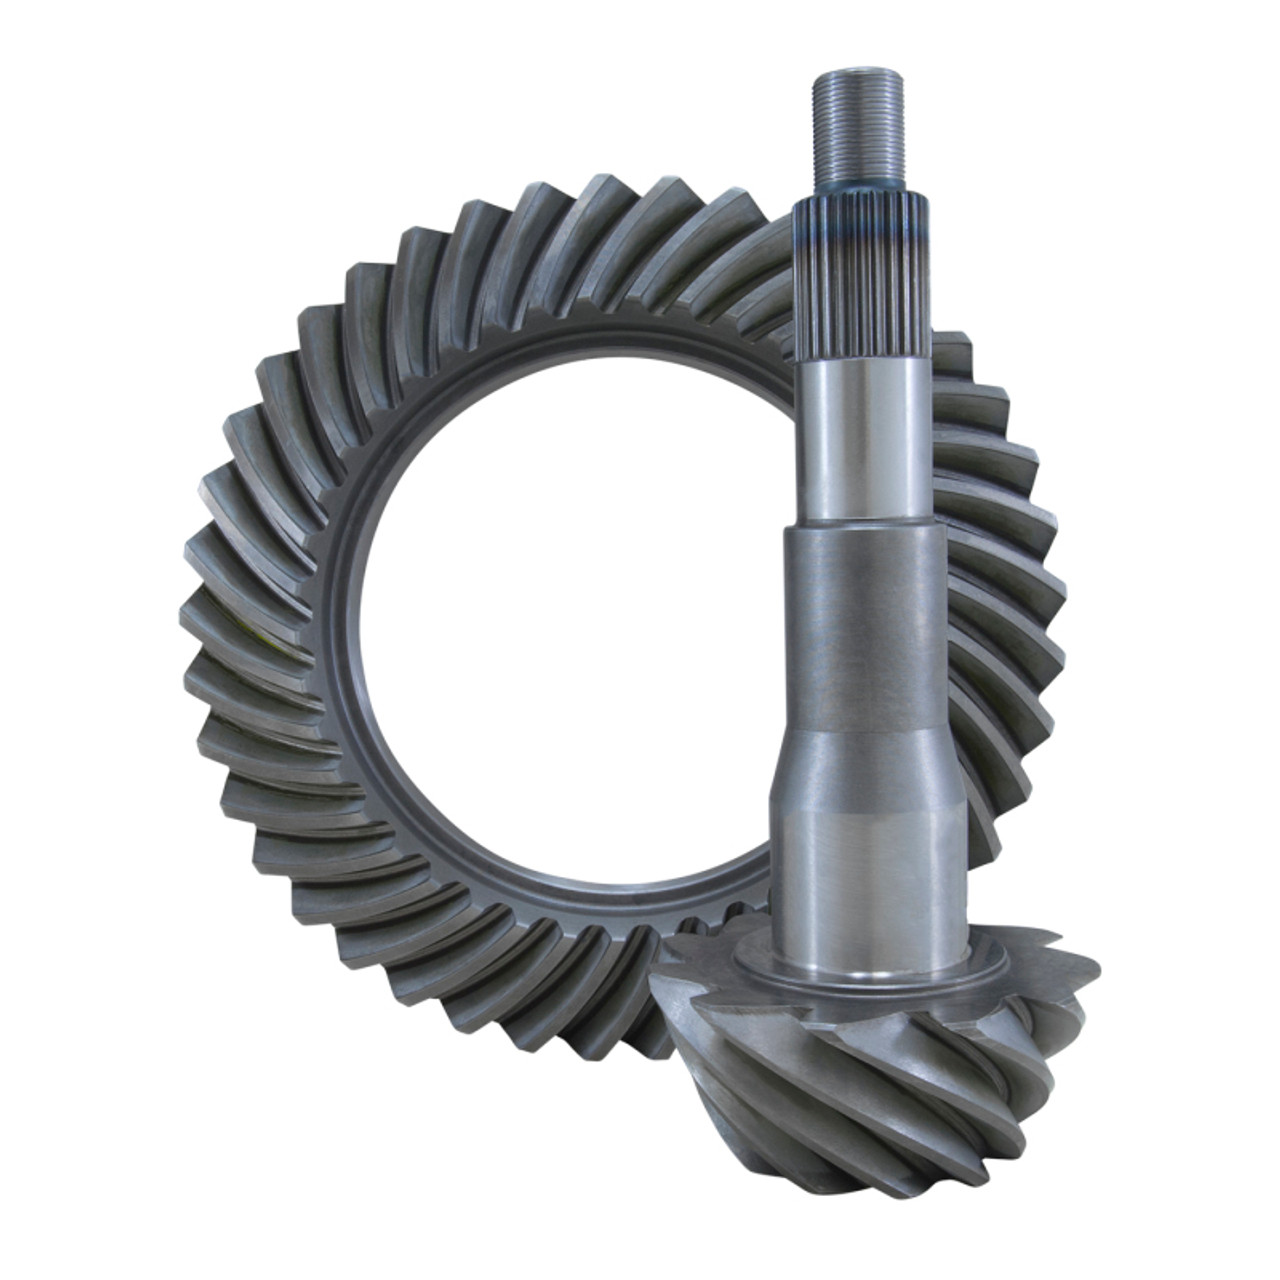 USA Standard Ring & Pinion Gear Set For Ford 10.25in in a 5.38 Ratio - ZG F10.25-538L